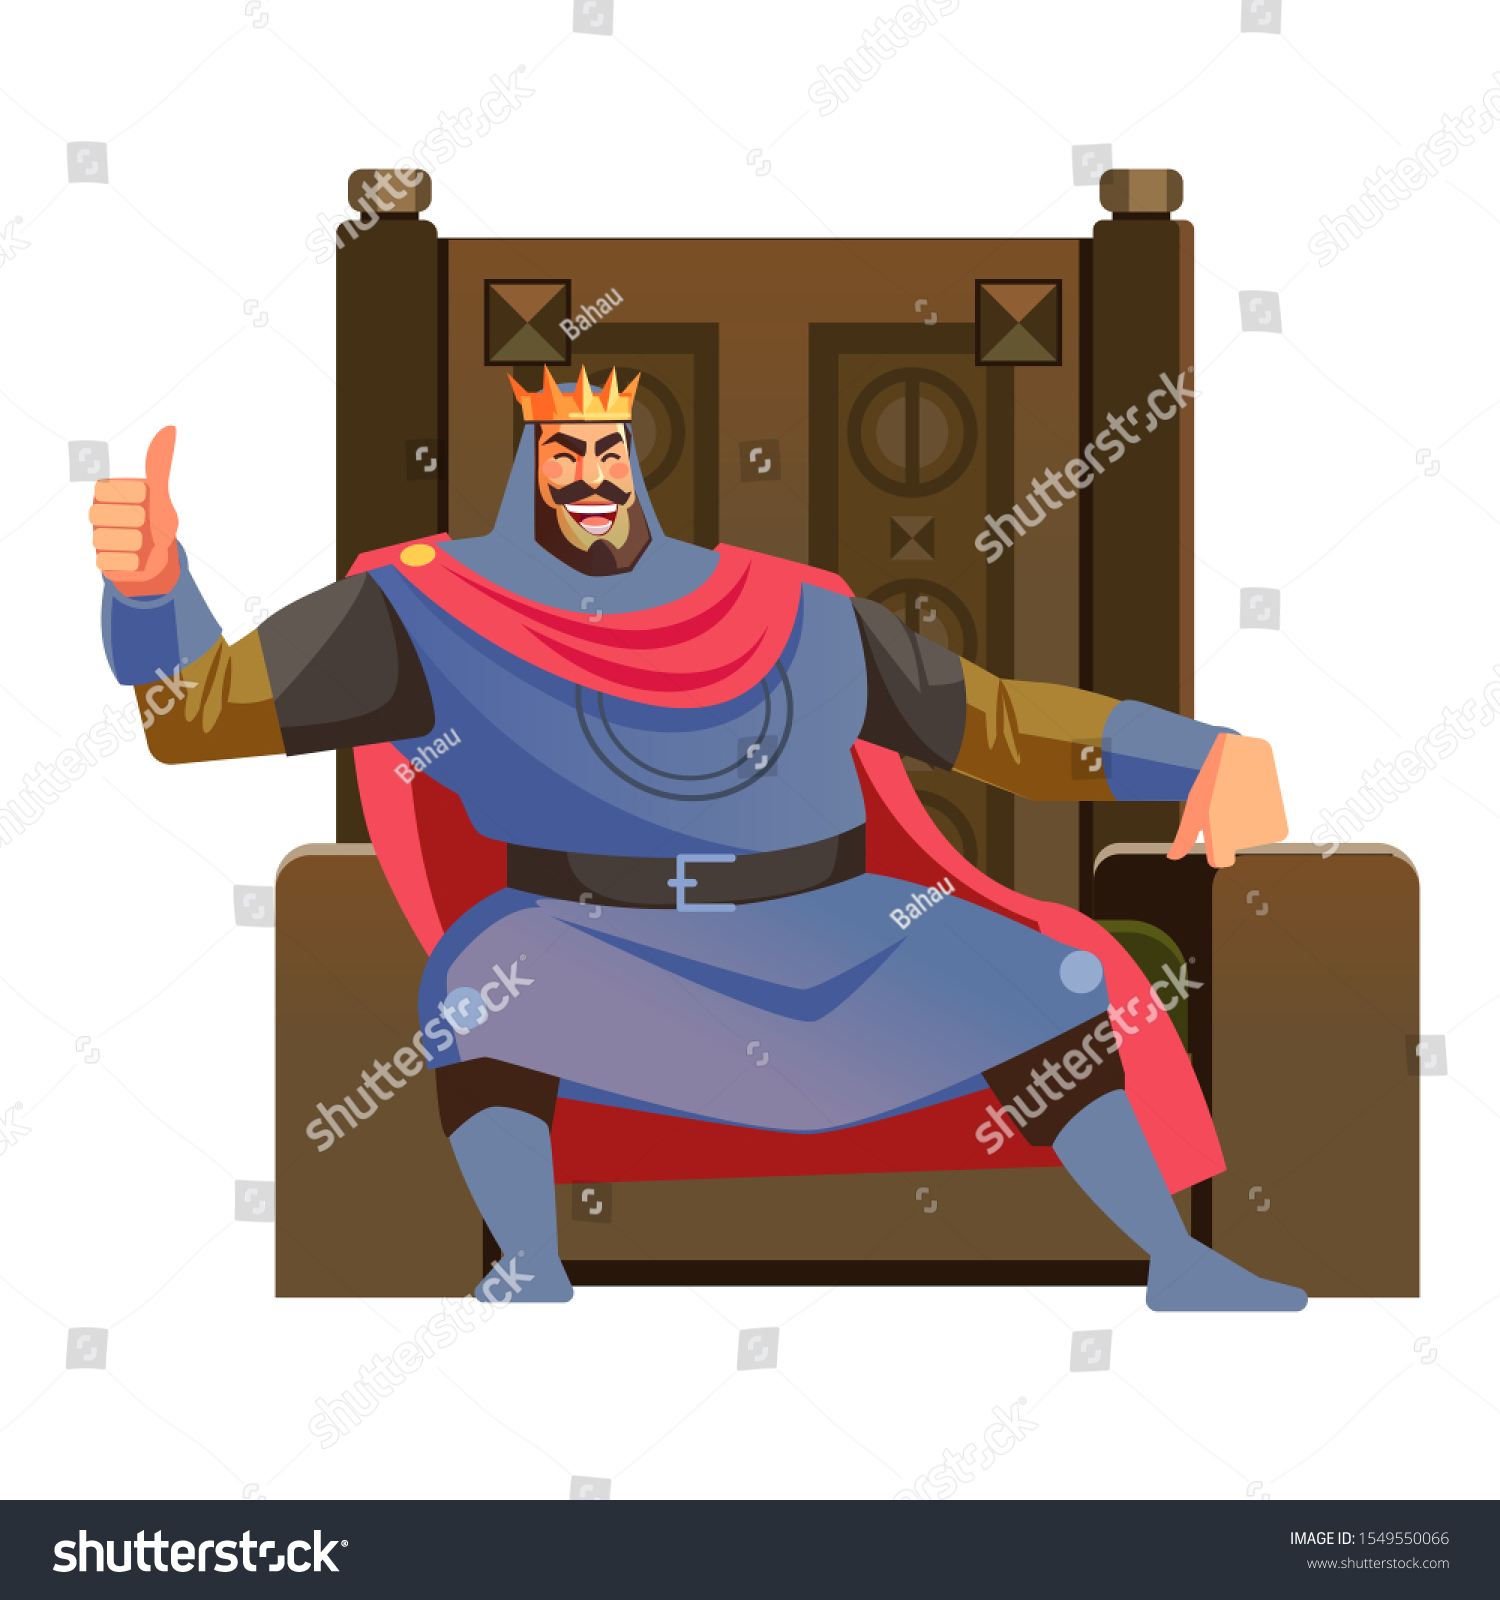 stock-vector-happy-king-cartoon-king-sits-on-throne-and-gives-thumbs-up-while-smiling-cartoon-vector-1549550066.jpg